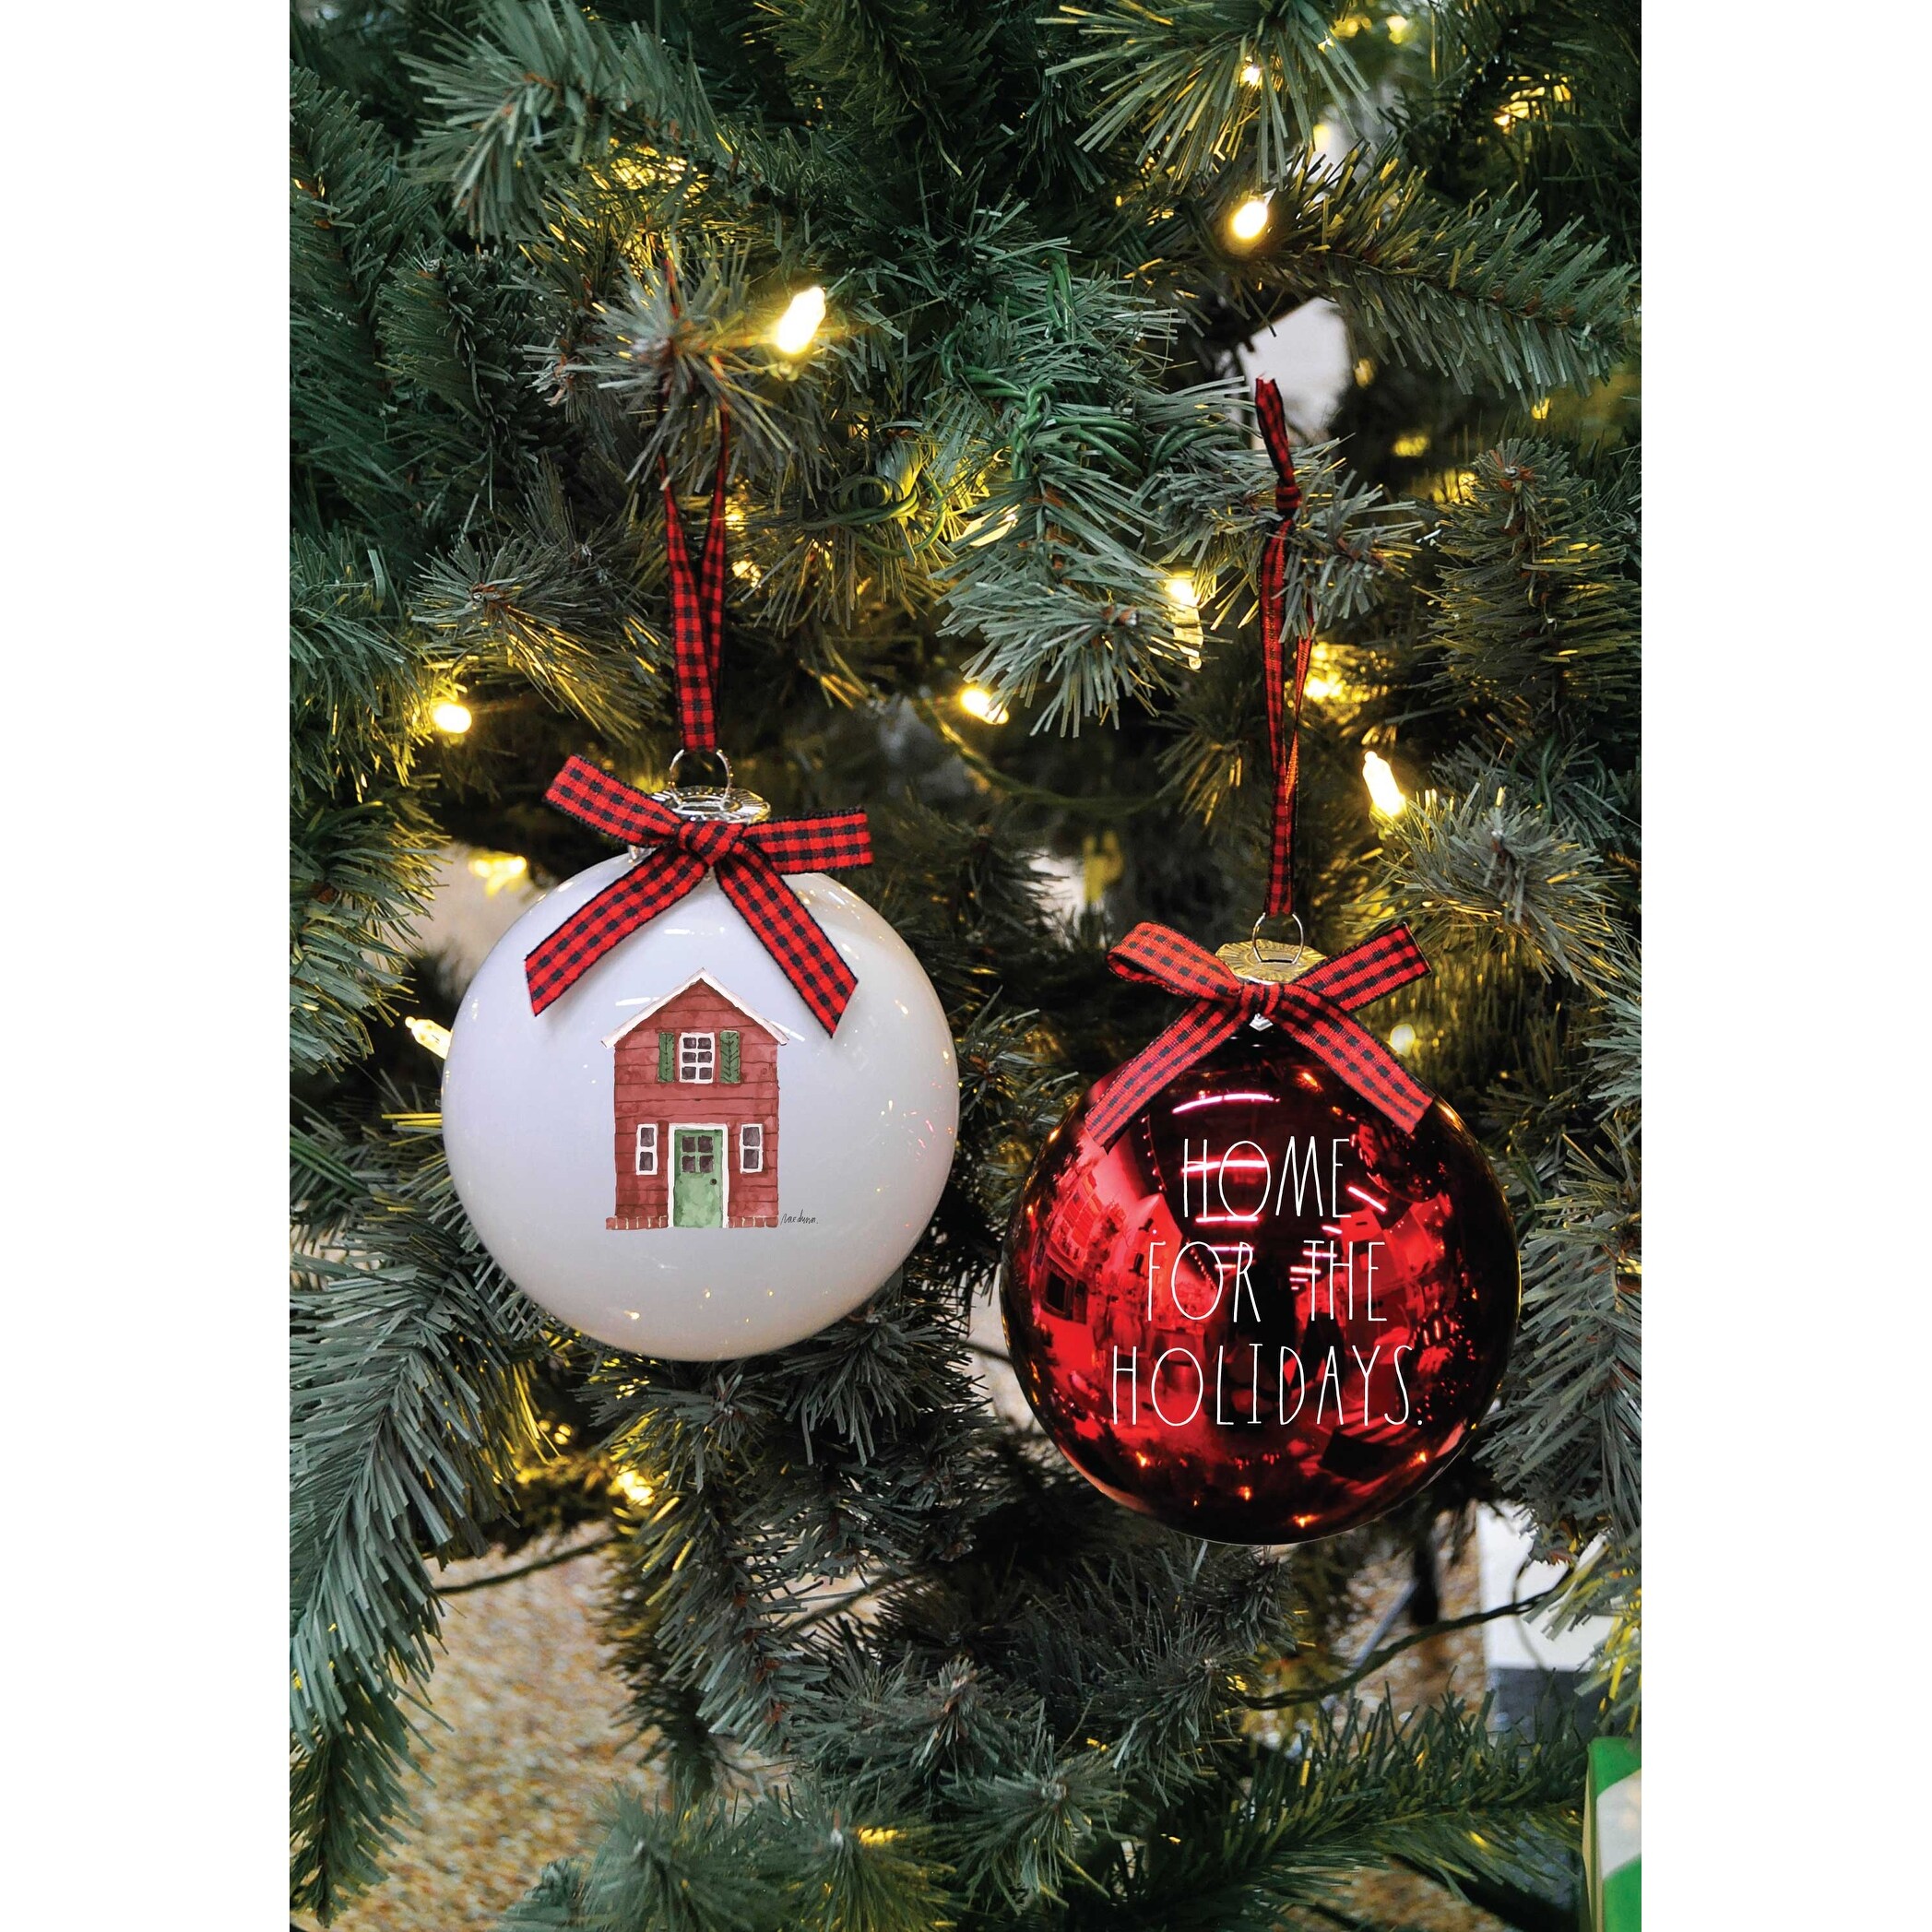 https://ak1.ostkcdn.com/images/products/is/images/direct/3b78bcc83573c9da007bc12bf0b1d73bf3af7b5e/Rae-Dunn-Set-of-2-CHRISTMAS-Ornaments.jpg